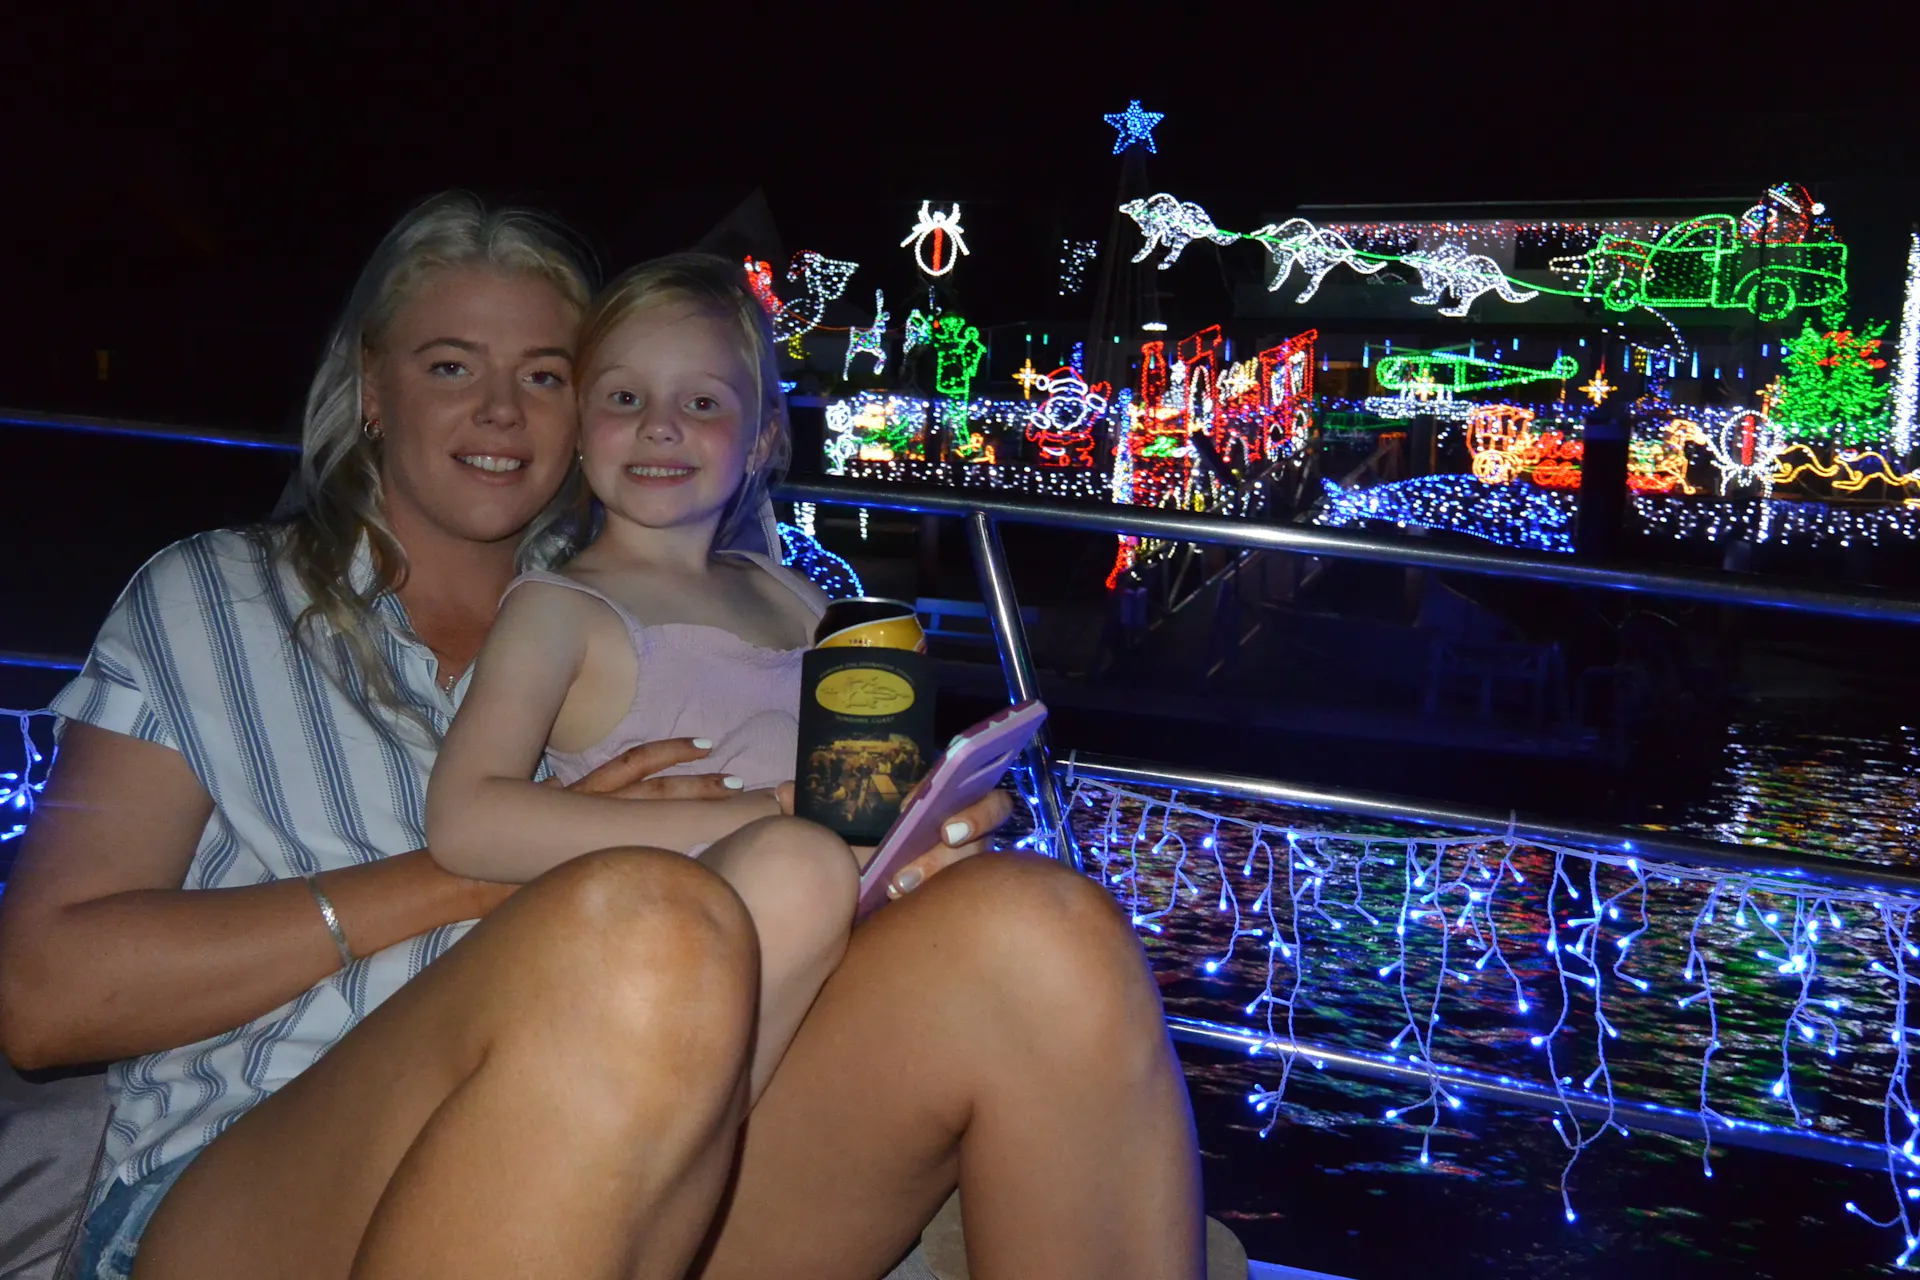 Ideal cruise for children, families, couples or anyone wanting a special evening in Mooloolaba.